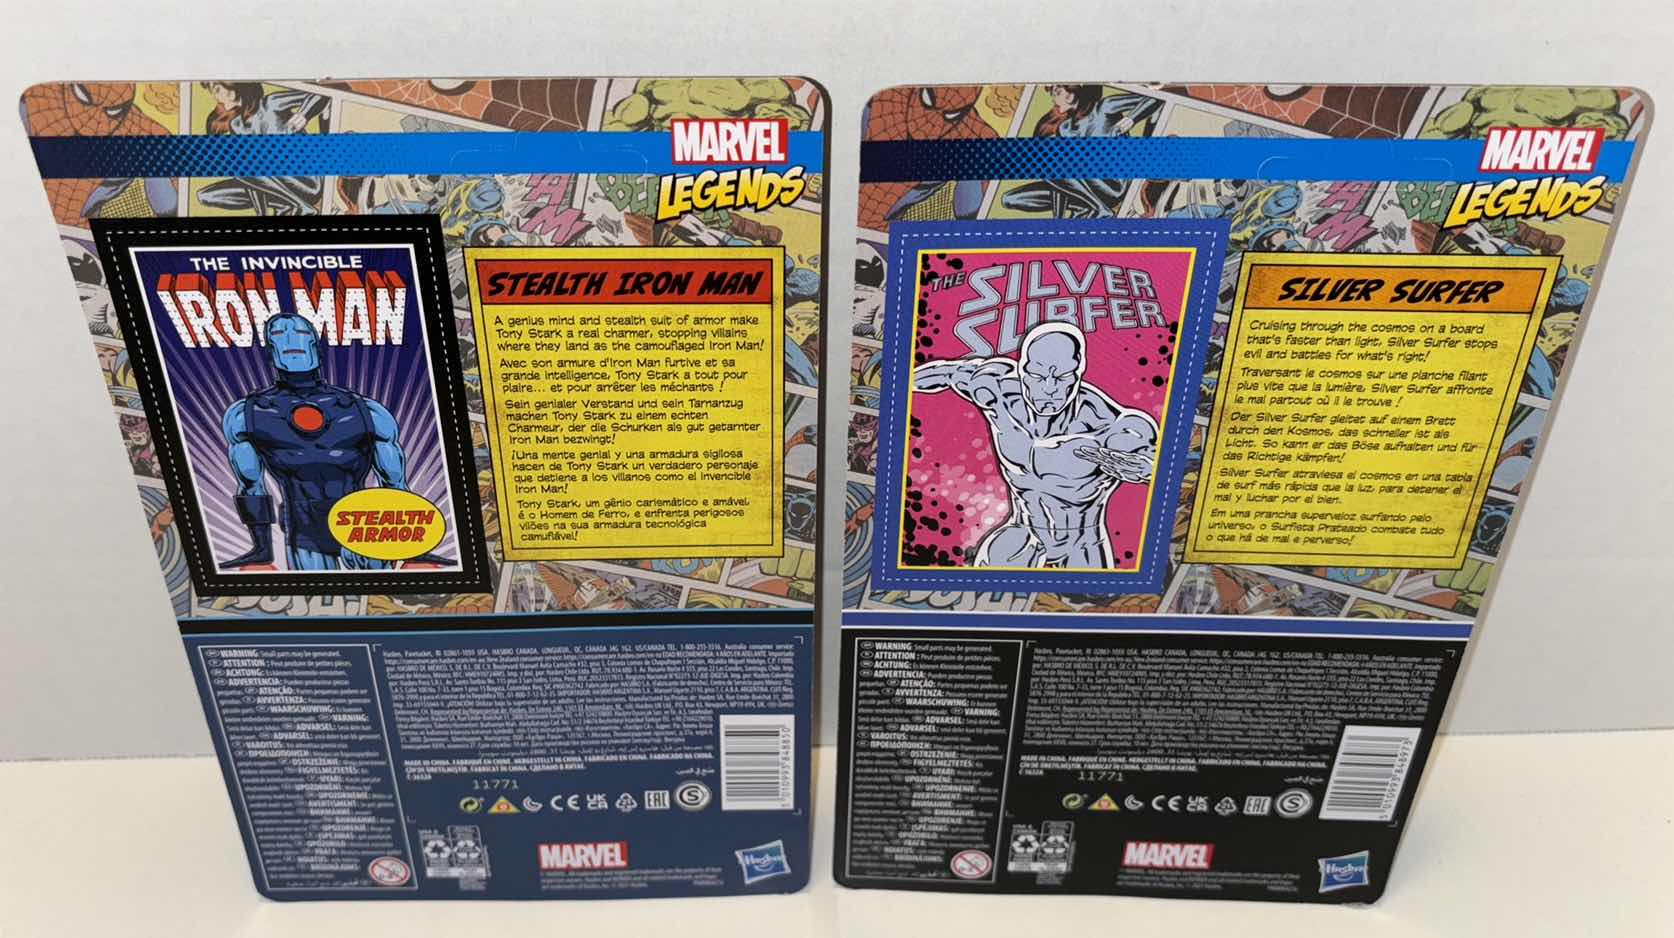 Photo 4 of NEW HASBRO KENNER MARVEL LEGENDS RETRO COLLECTION 3.75” ACTION FIGURES 2-PACK, THE INVINCIBLE ITON MAN “STEALTH ARMOR” & “THE SILVER SURFER”